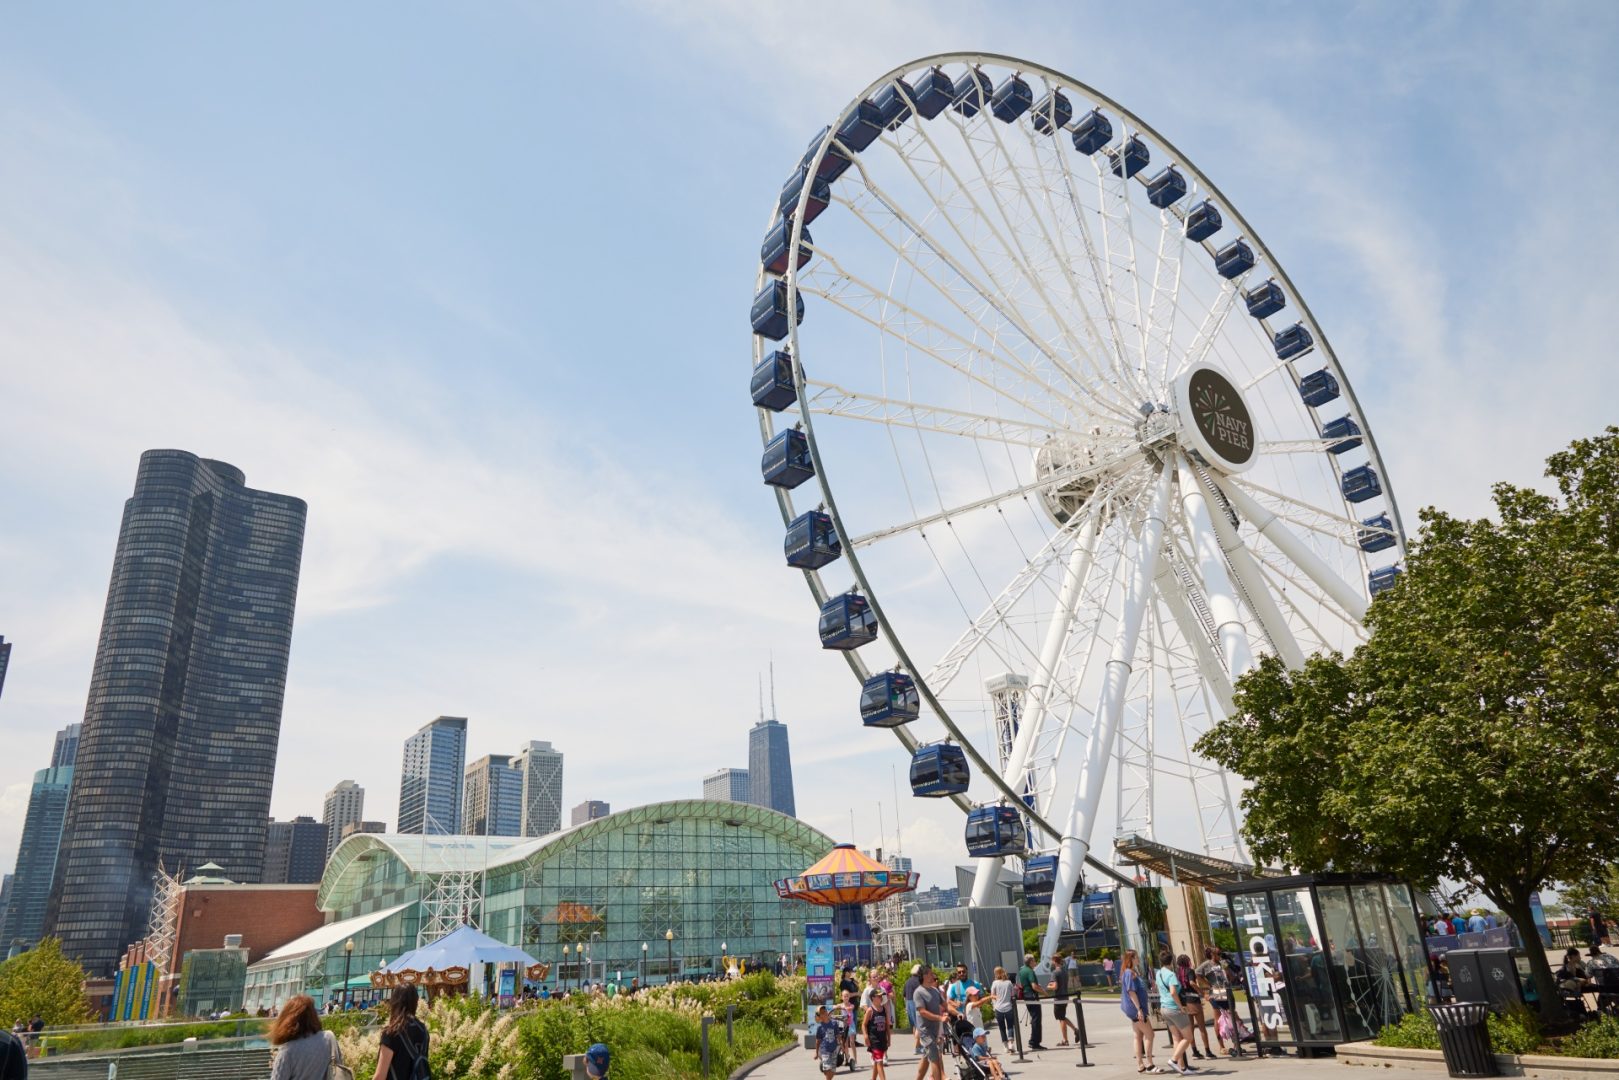 Low angle of Navy Pier's ferris wheel and attractions with the cityscape in the background.